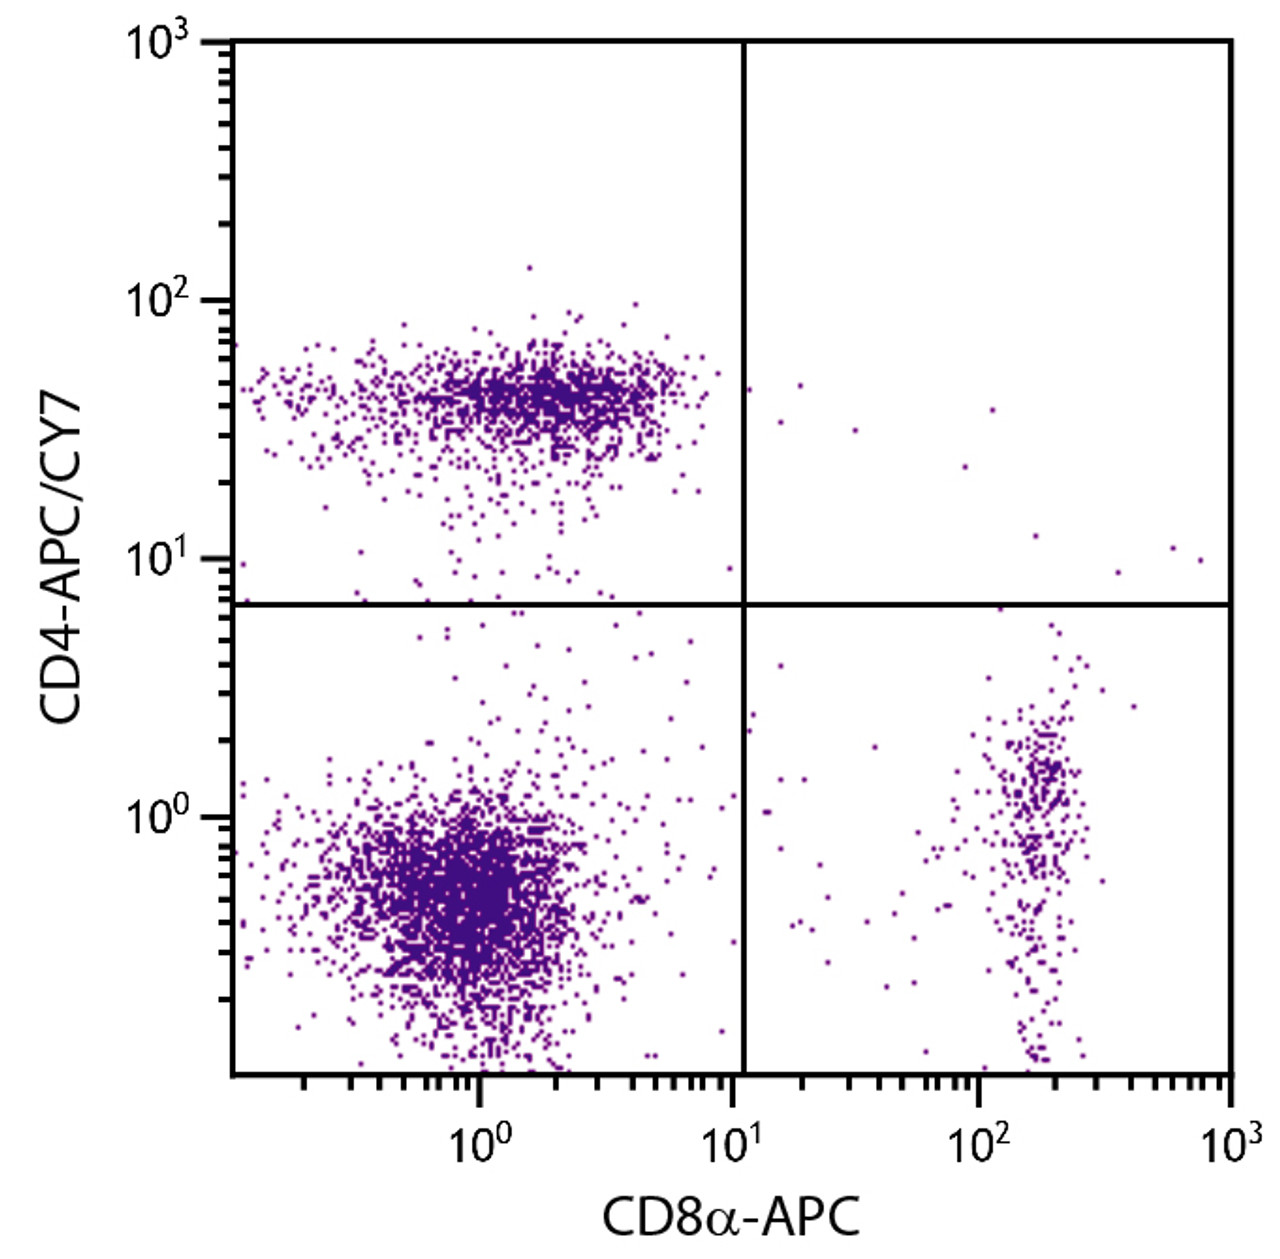 BALB/c mouse splenocytes were stained with Rat Anti-Mouse CD4-APC/CY7 (Cat. No98-595) and Rat Anti-Mouse CD8?-APC .